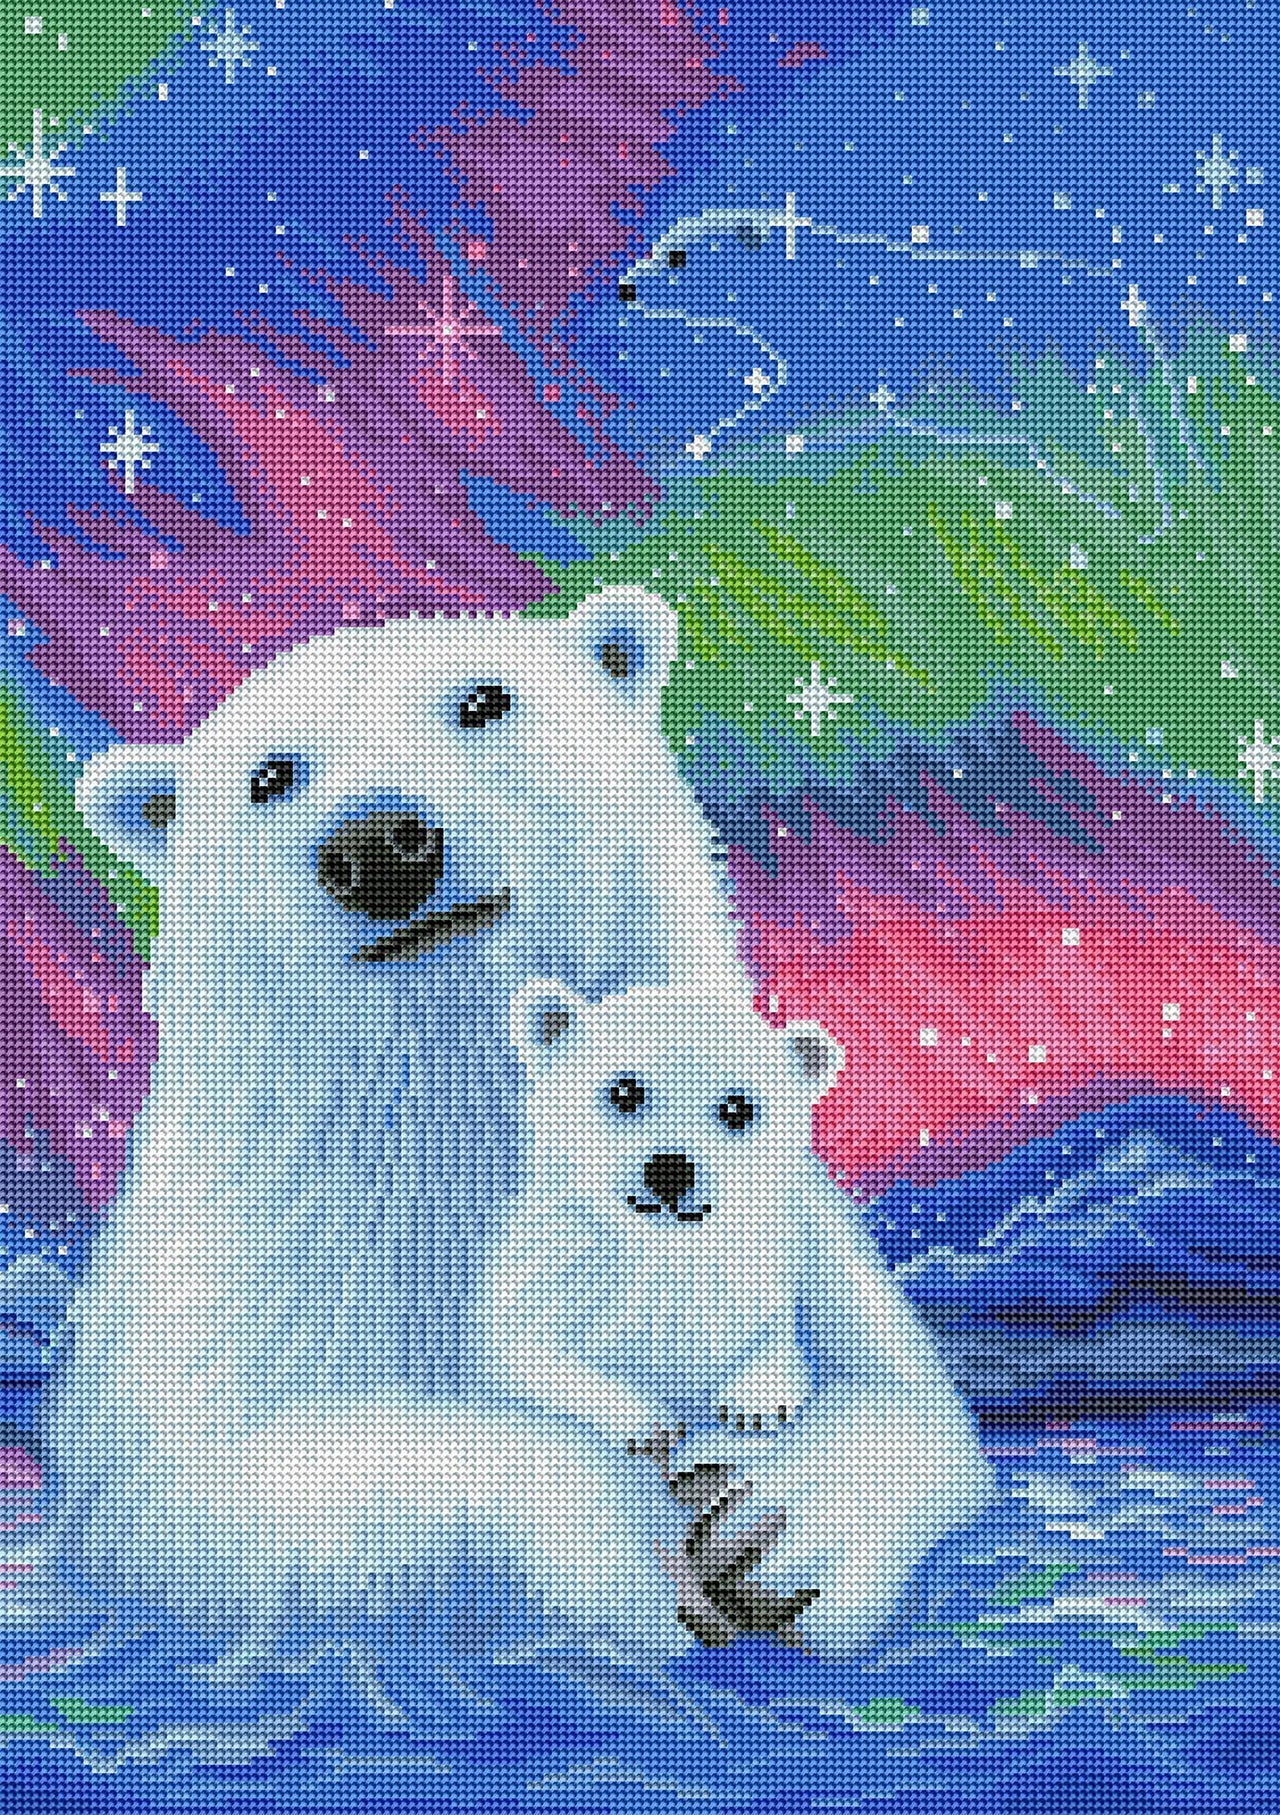 Diamond Painting Arctic Lights 17" x 24″ (43cm x 61cm) / Round with 41 Colors including 4 ABs / 33,200